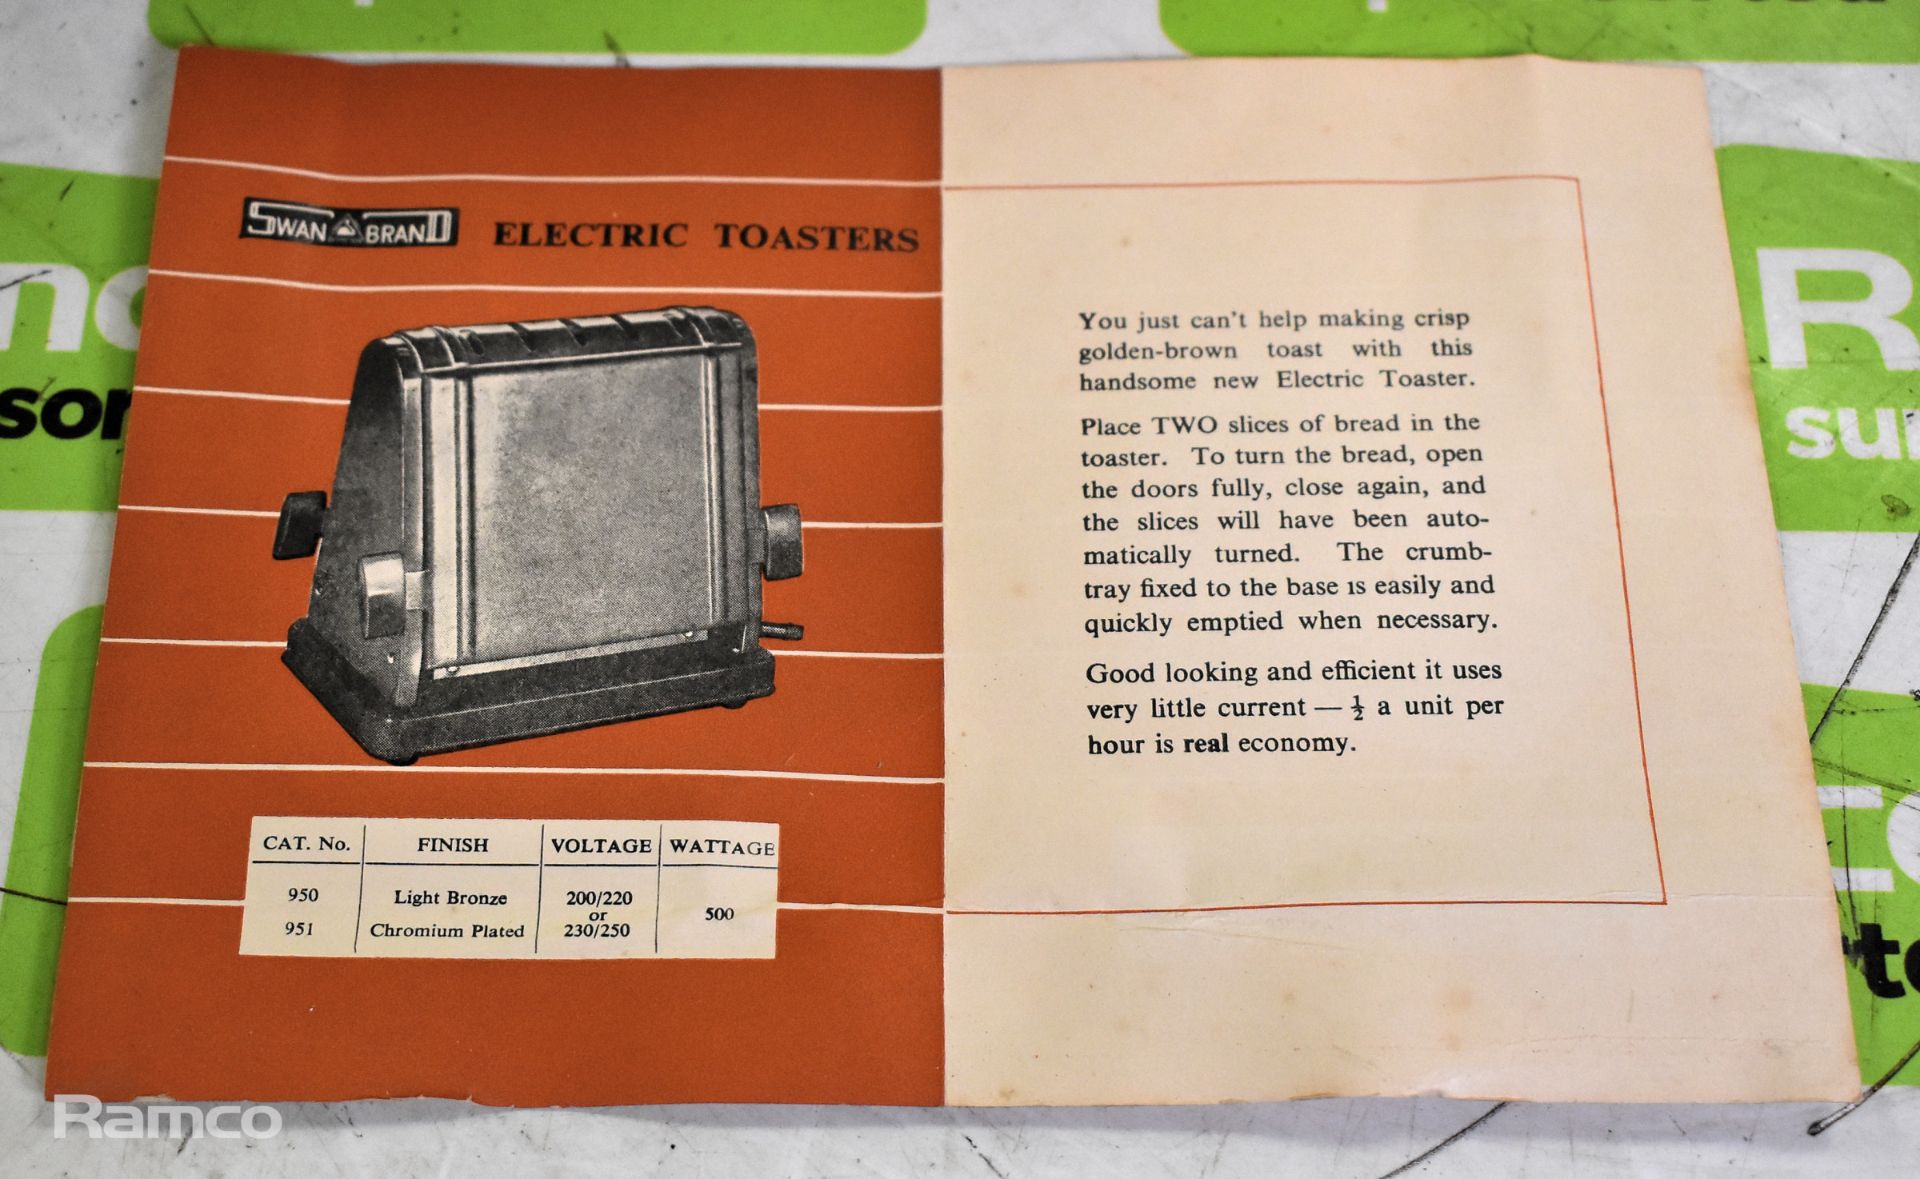 Swan Brand - The Premier Electric Toaster - cat No. 903 - Image 10 of 11